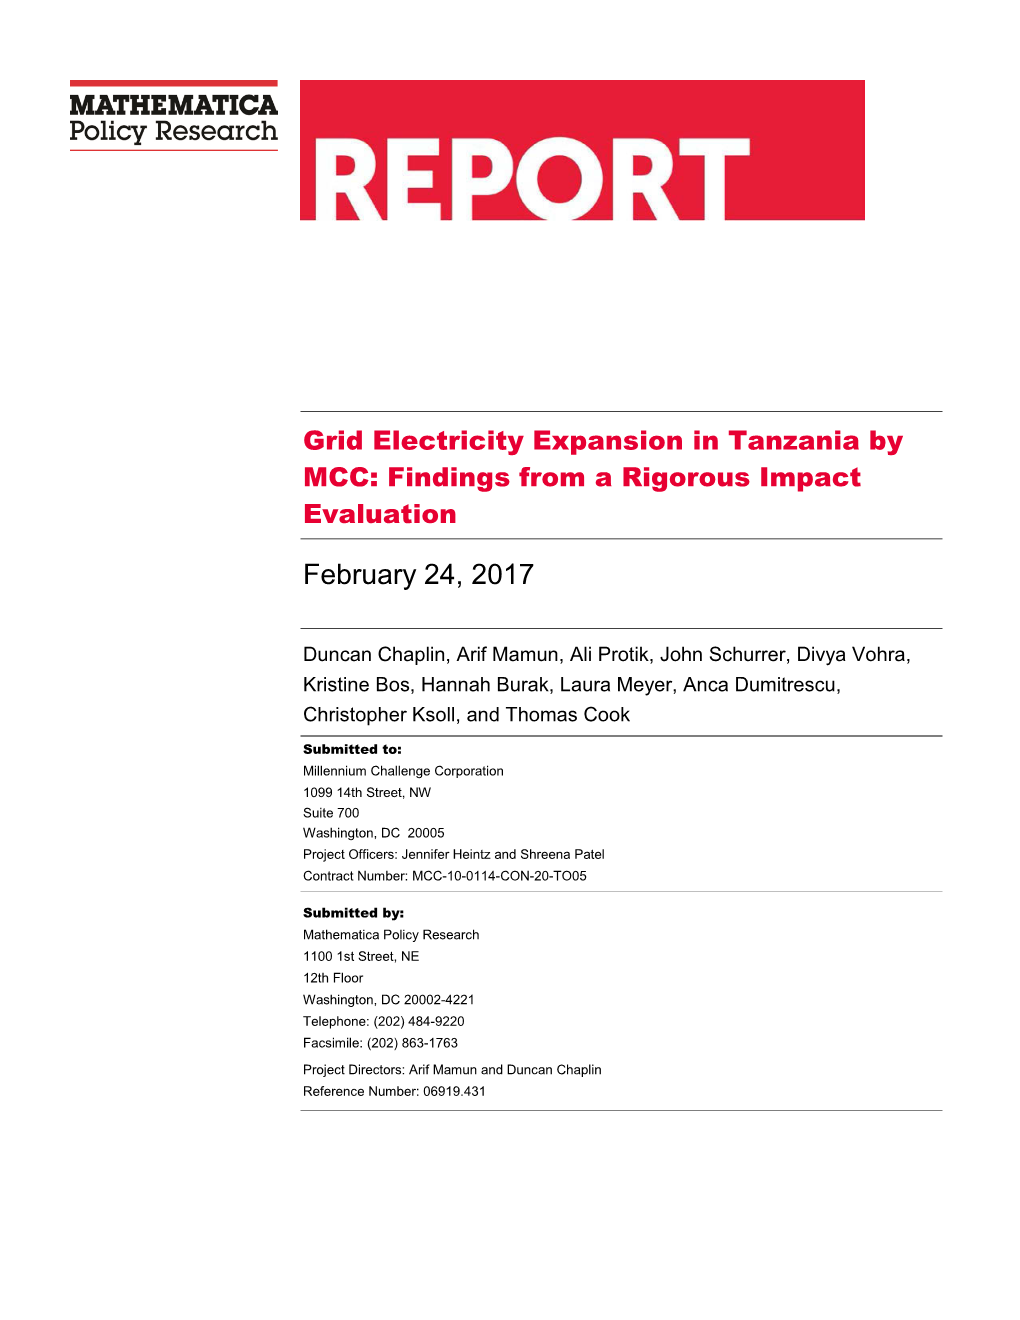 Grid Electricity Expansion in Tanzania by MCC: Findings from a Rigorous Impact Evaluation